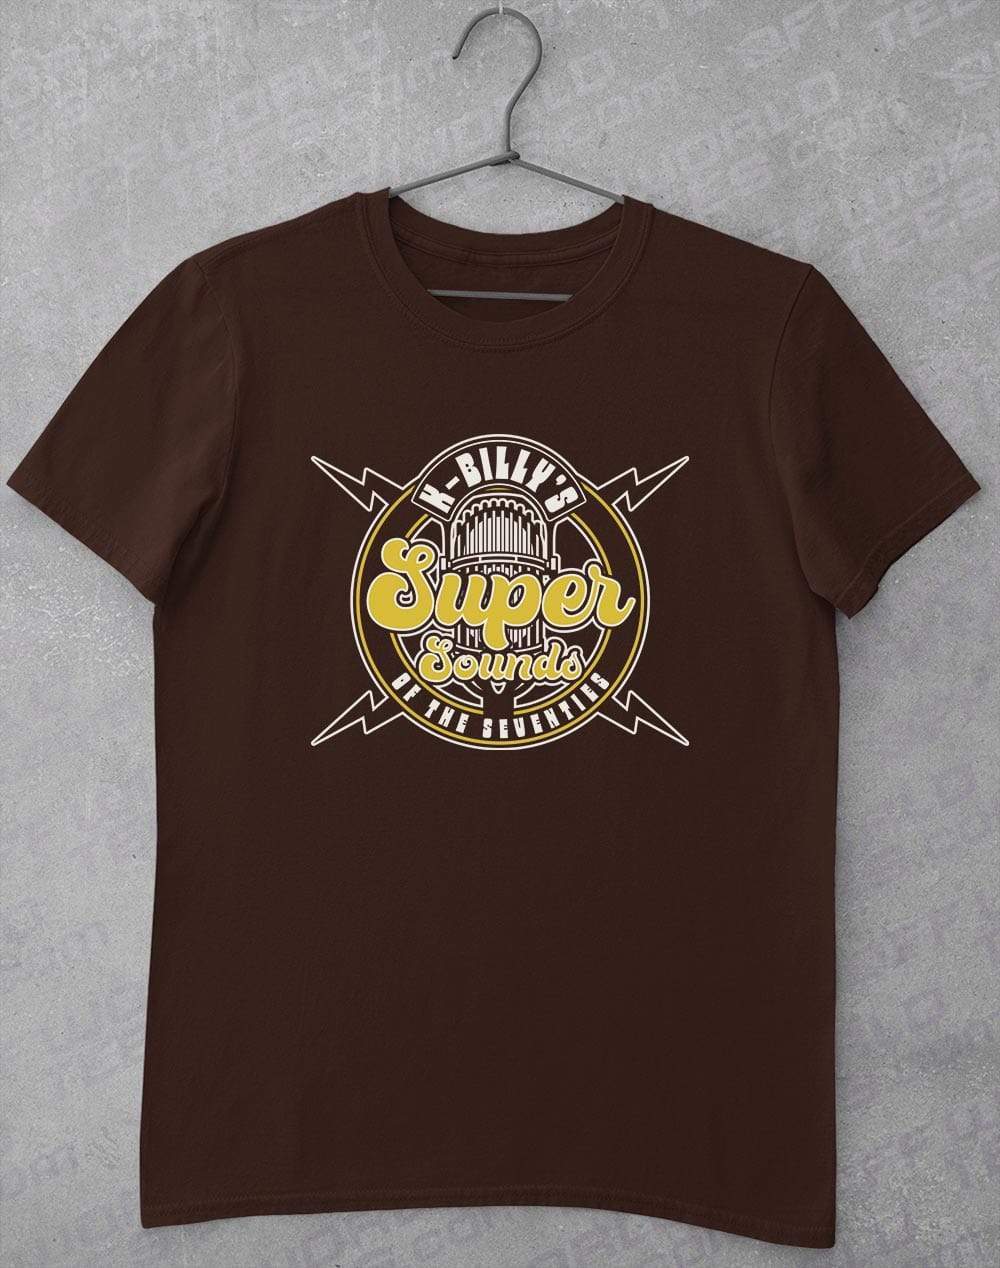 K-Billy's Super Sounds of the 70's T-Shirt L / Dark Chocolate  - Off World Tees